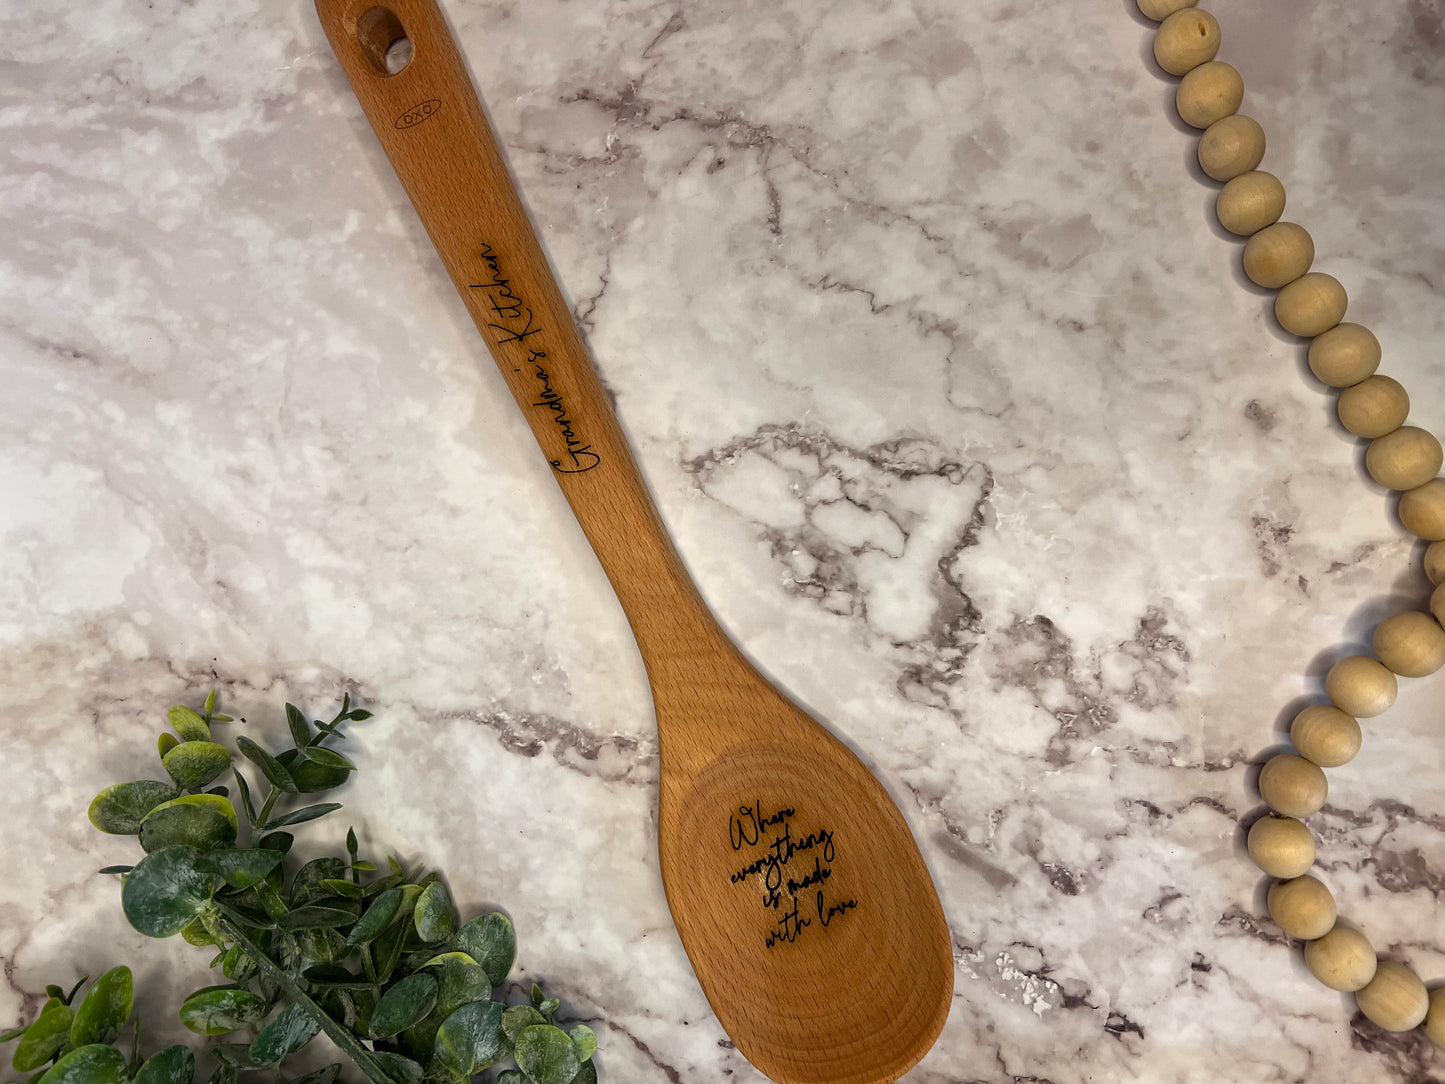 Engraved wooden spoon